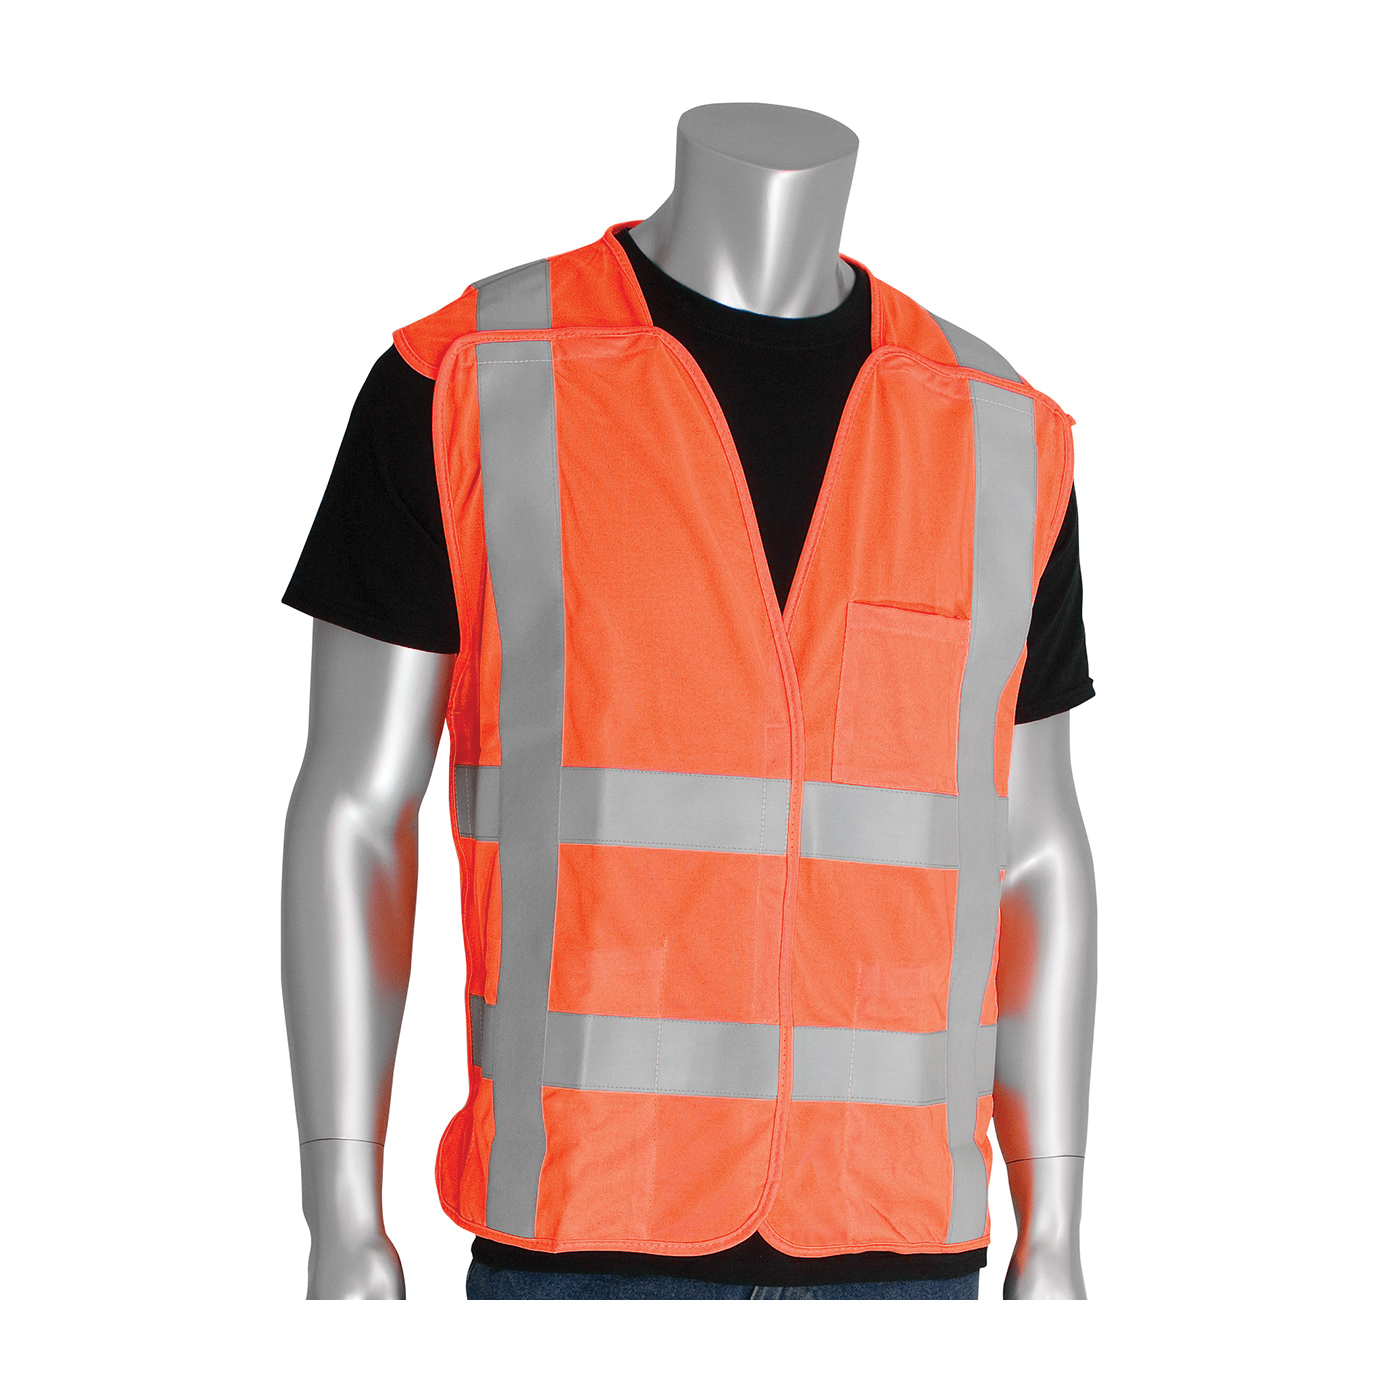 PIP® SafetyGear 305-5PVFROR-2X/3X FR Treated Solid Vest, 2XL/3XL, Hi-Viz Orange, Polyester, Hook and Loop Closure, ANSI Class: Class 2, Specifications Met: ANSI/ISEA 107